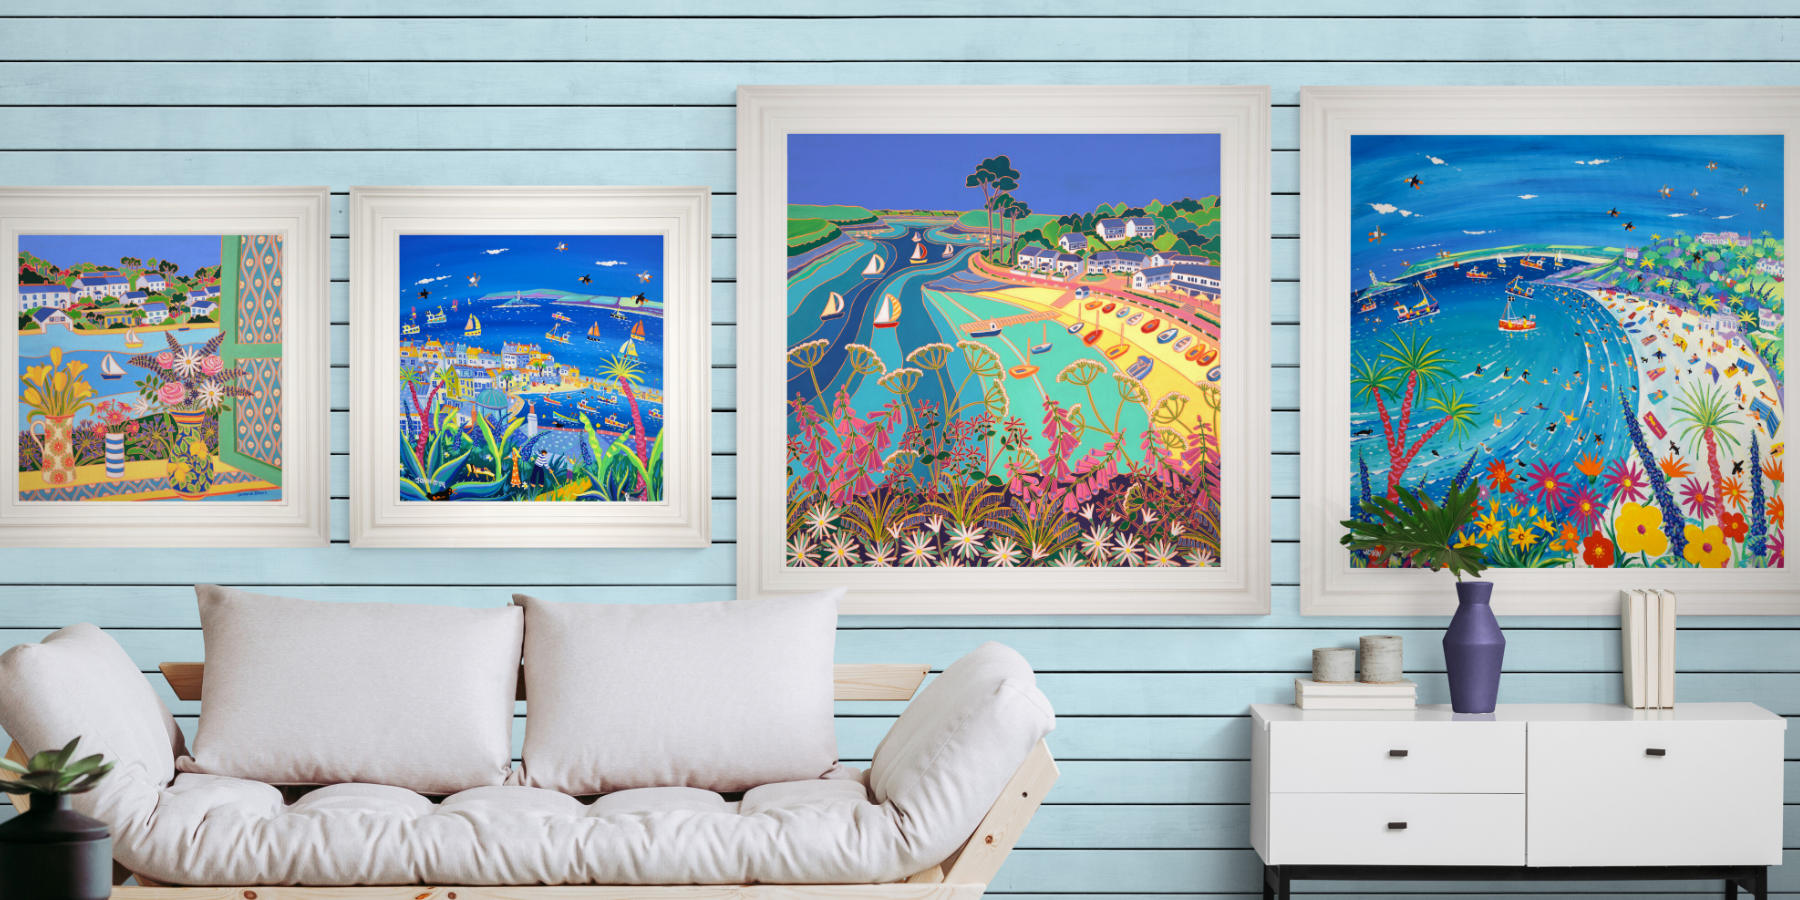 Selection of original paintings by Joanne Short and John Dyer available for sale at the John Dyer Gallery online